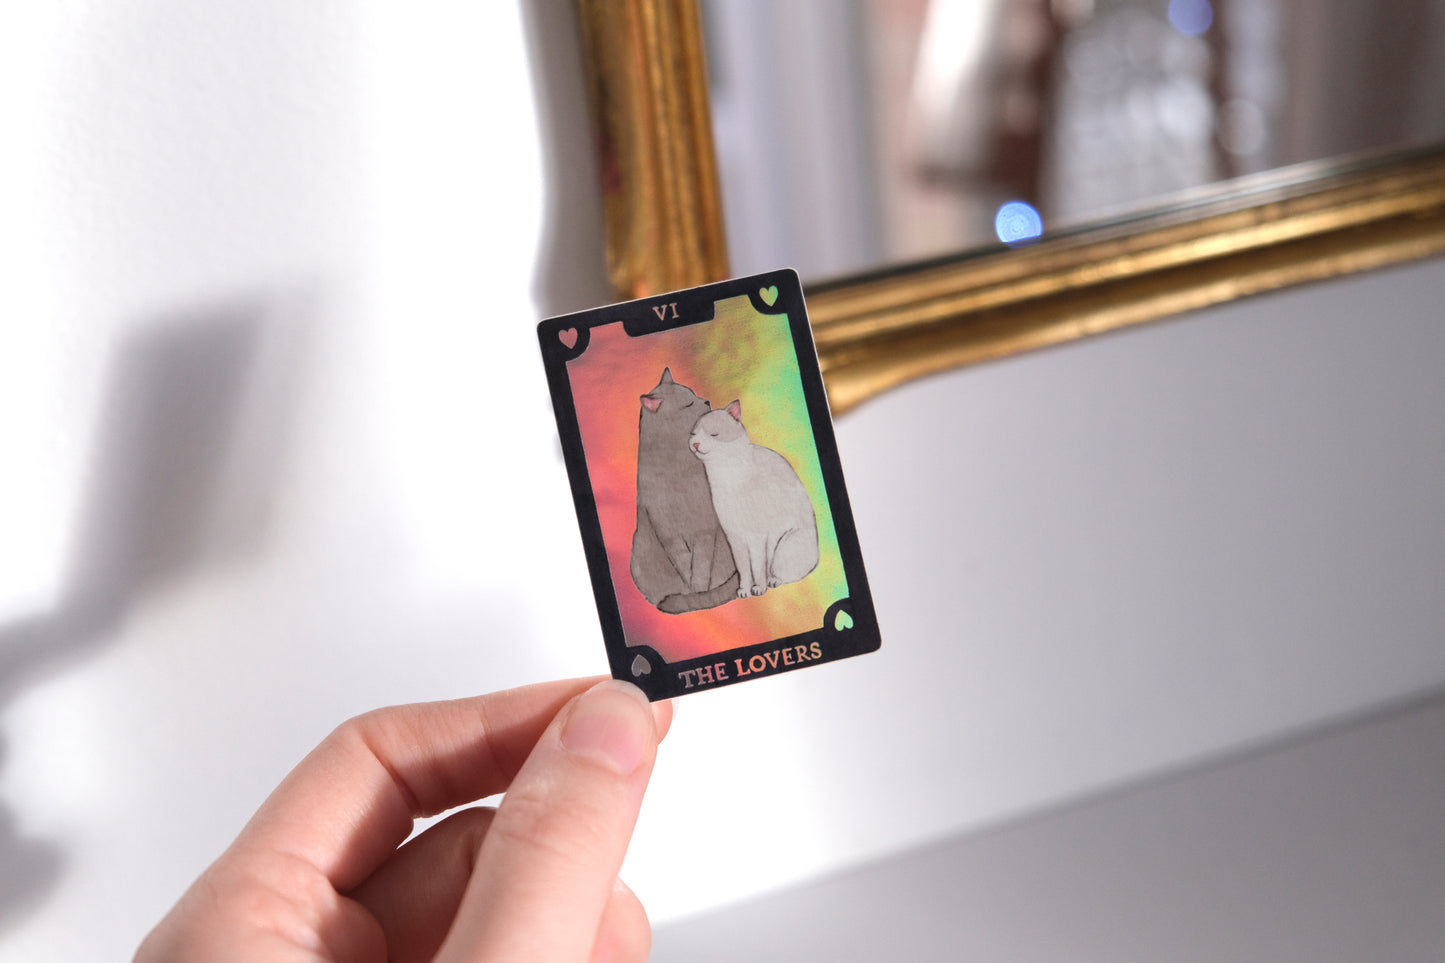 Tarot Card - The Lovers Holographic Sticker